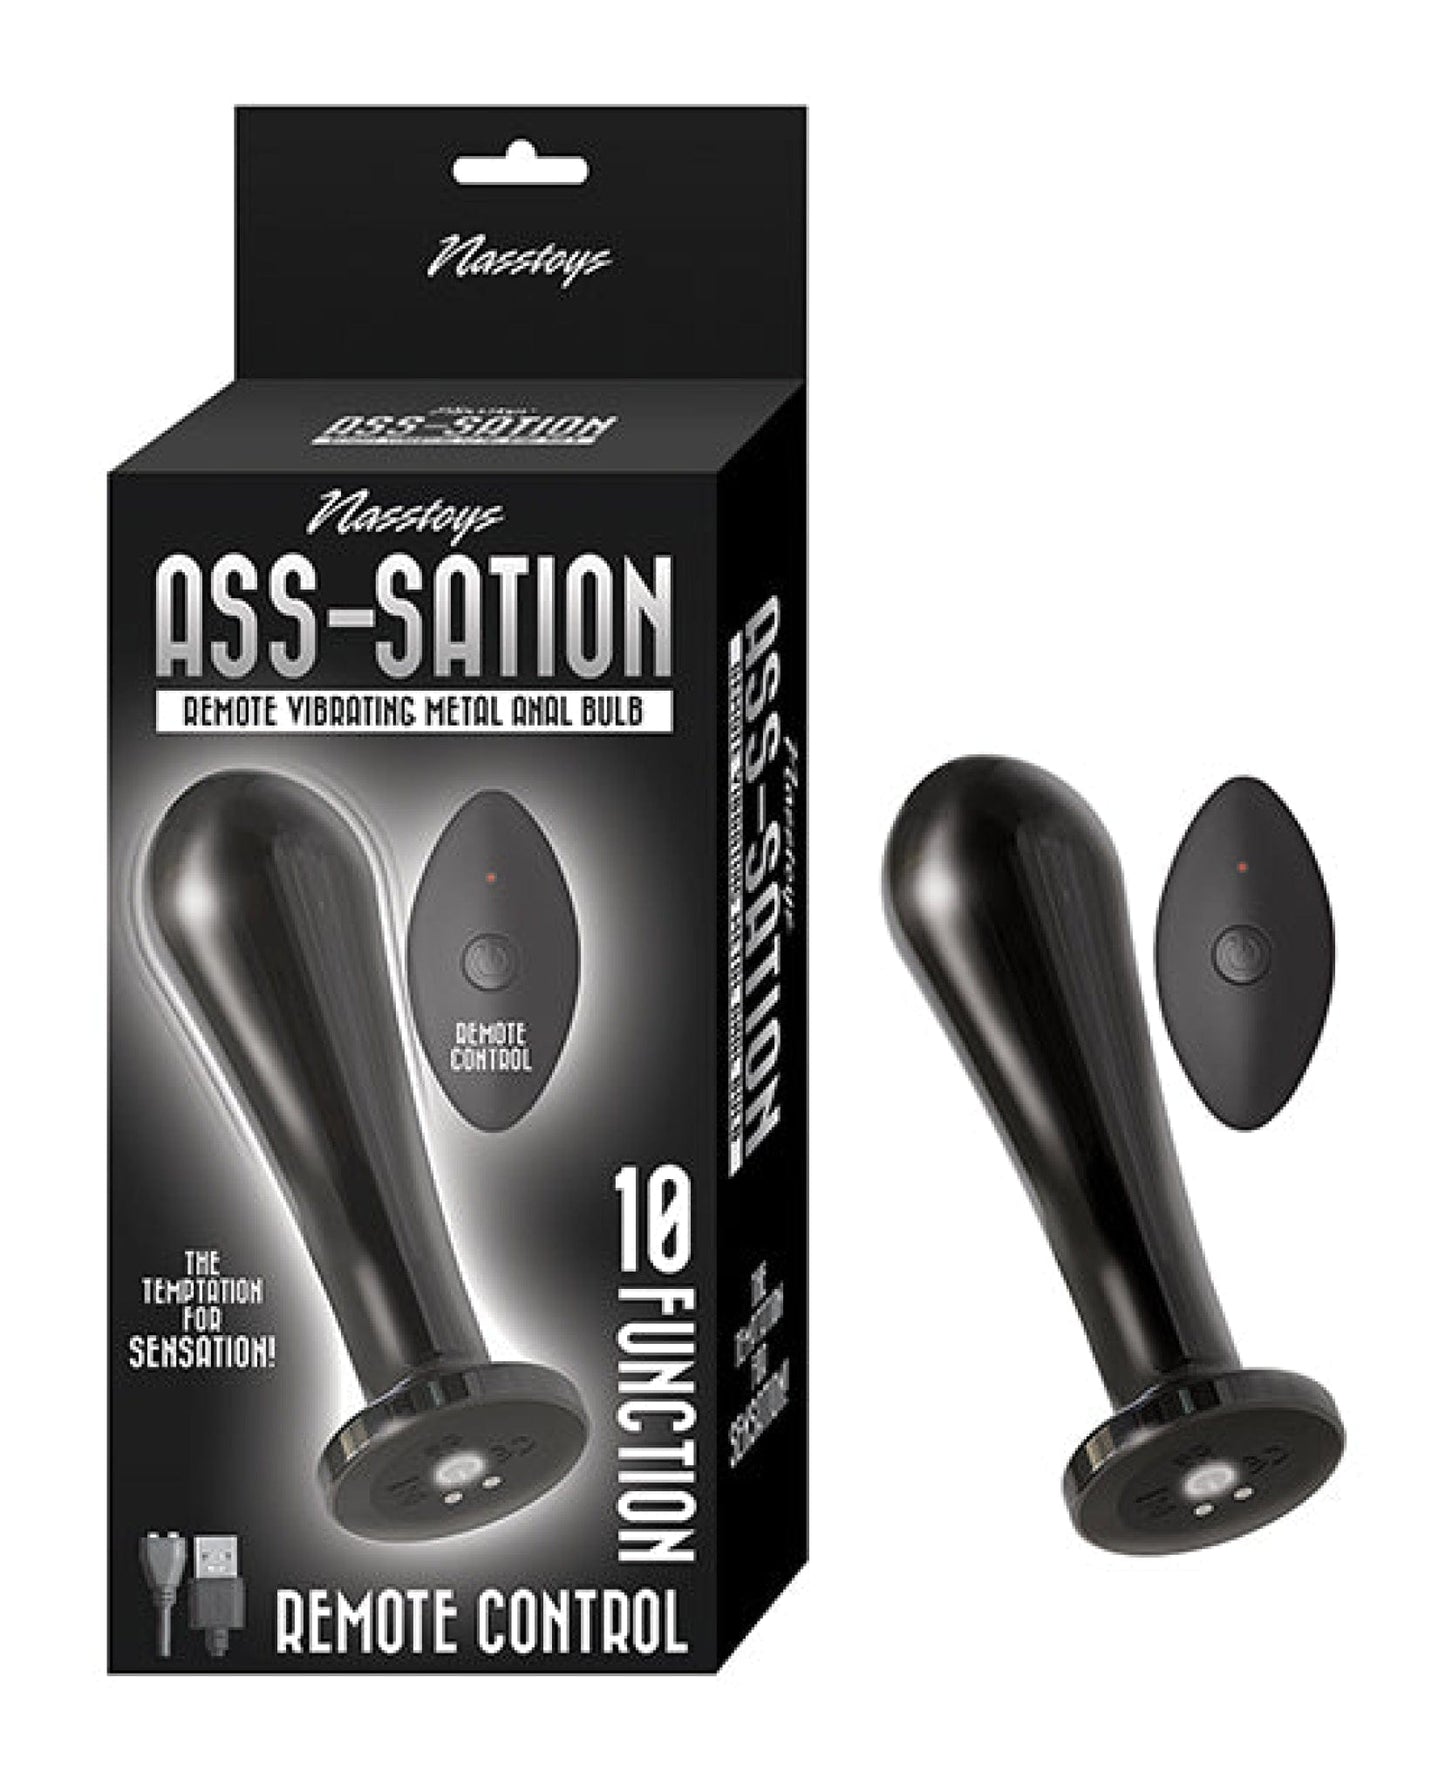 Doll Authority Anal Products Black Ass-sation Remote Vibrating Metal Anal Bulb